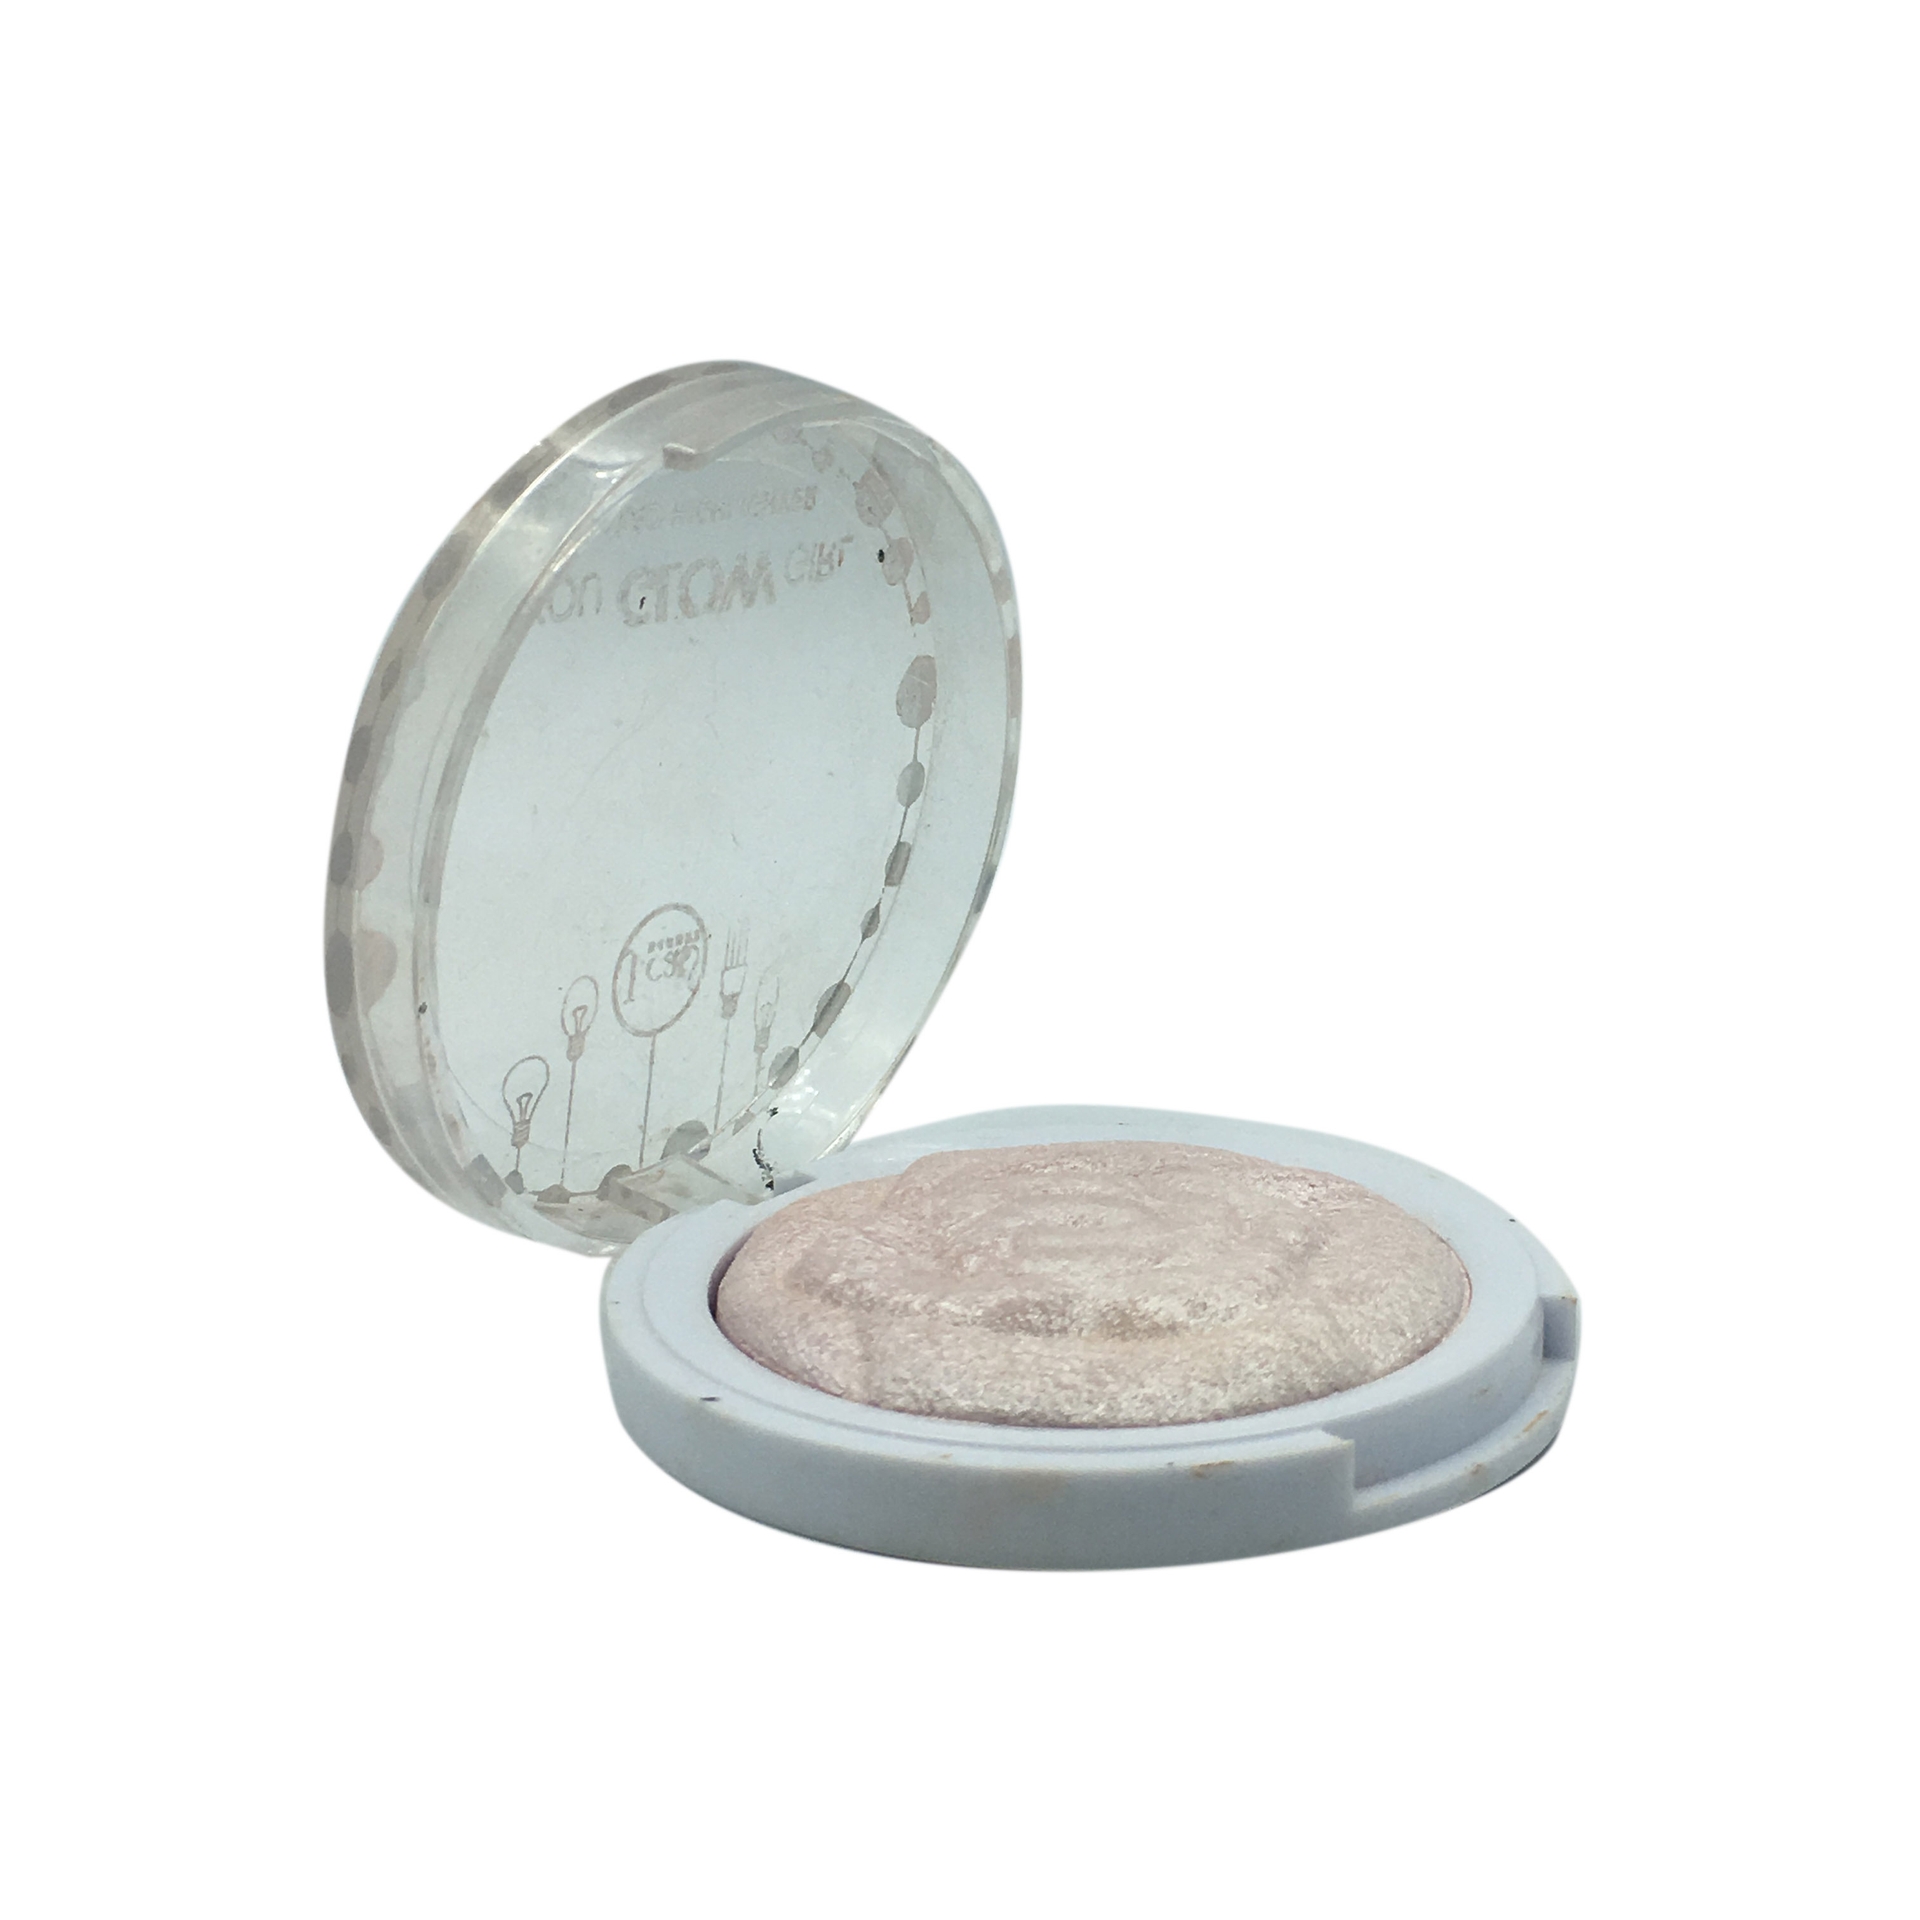 J.Cat Beauty You Glow Girl Baked Highlighter Faces